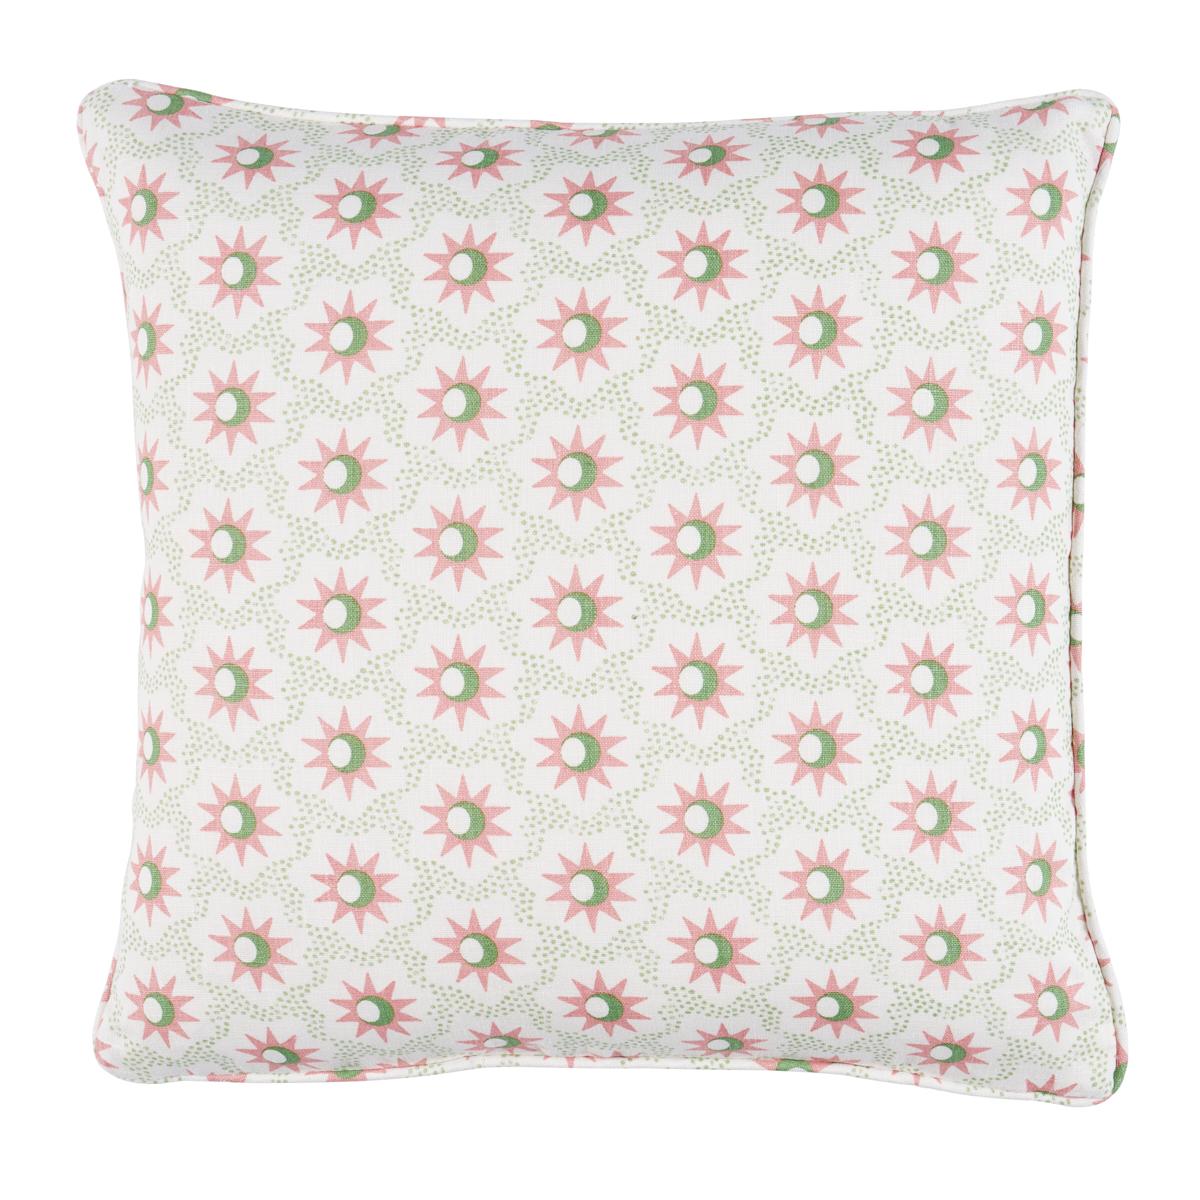 Lucie Pillow in Pink & Green 18 x 18" For Sale